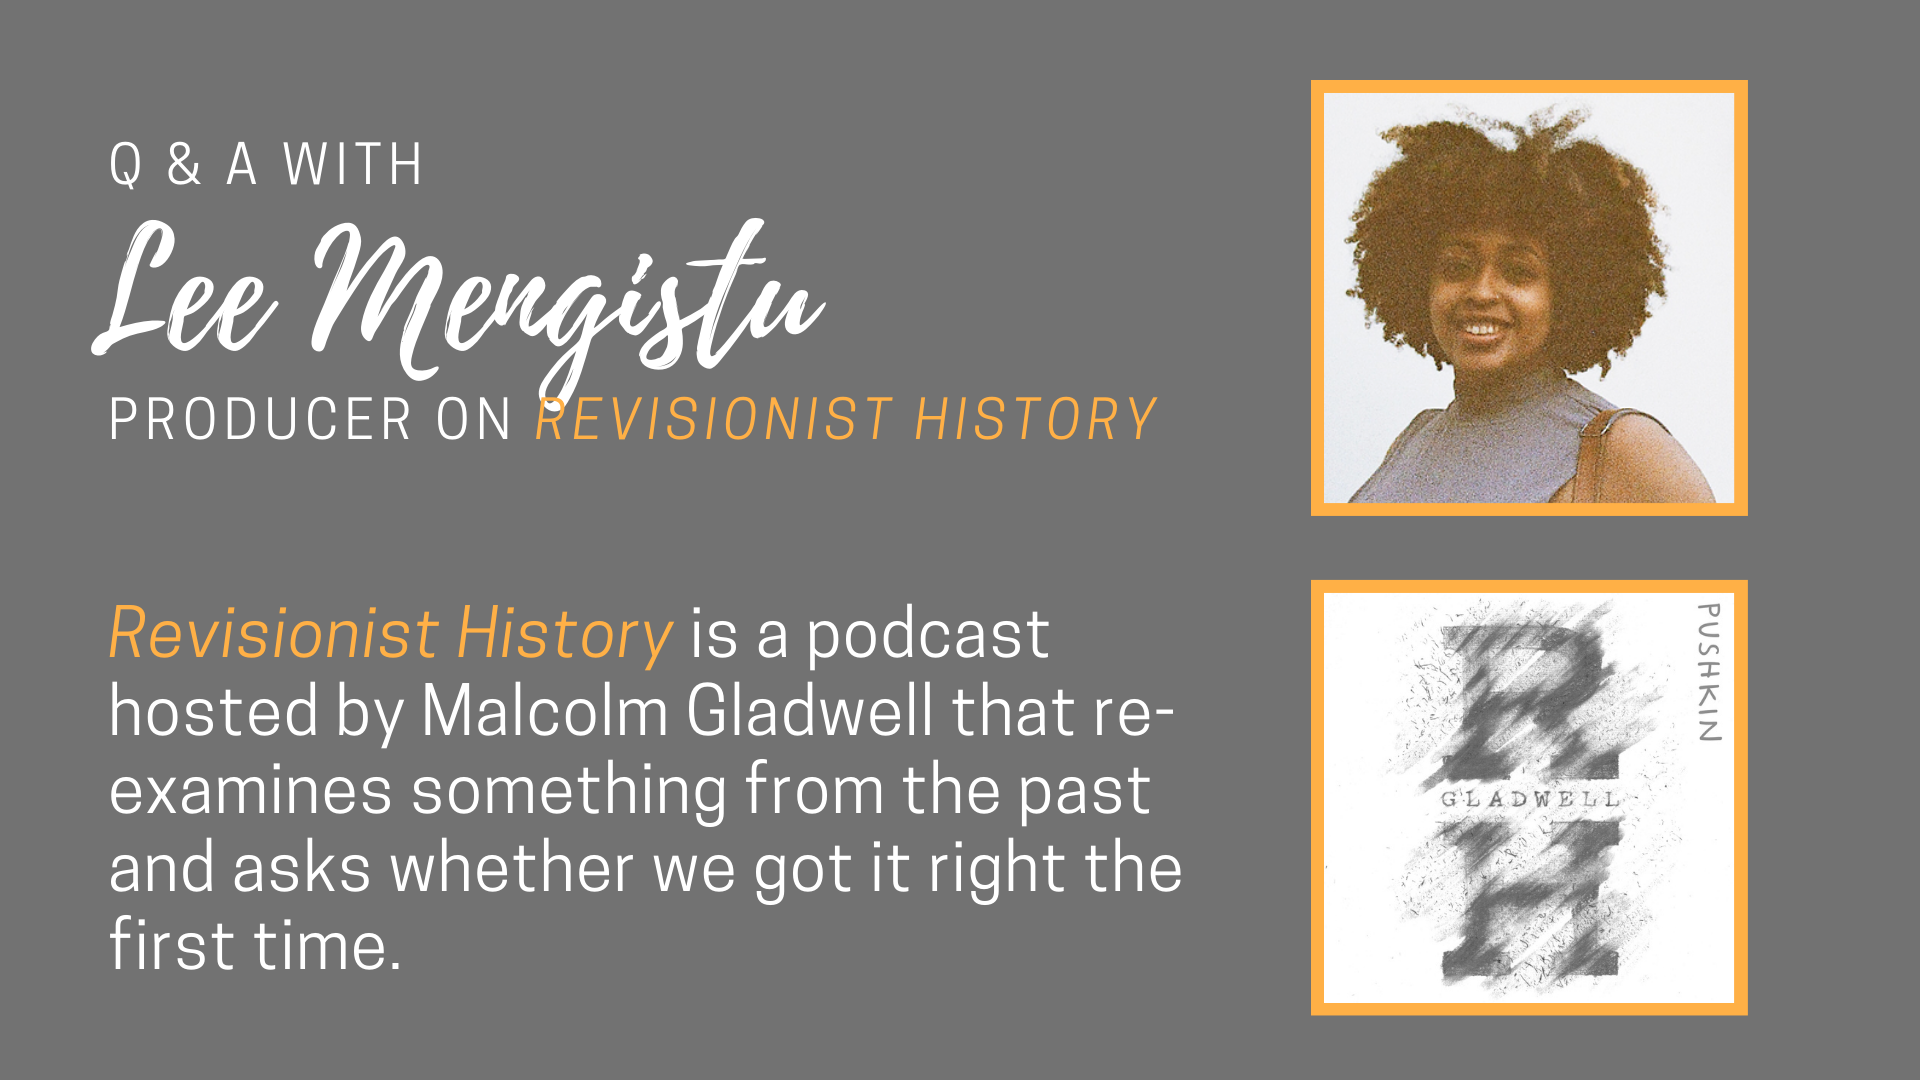 Q&A with Lee Mengistu: Producer on Revisionist History. Revisionist History is a podcast hosted by Malcolm Gladwell that re-examines something from the past and asks whether we got it right the first time.